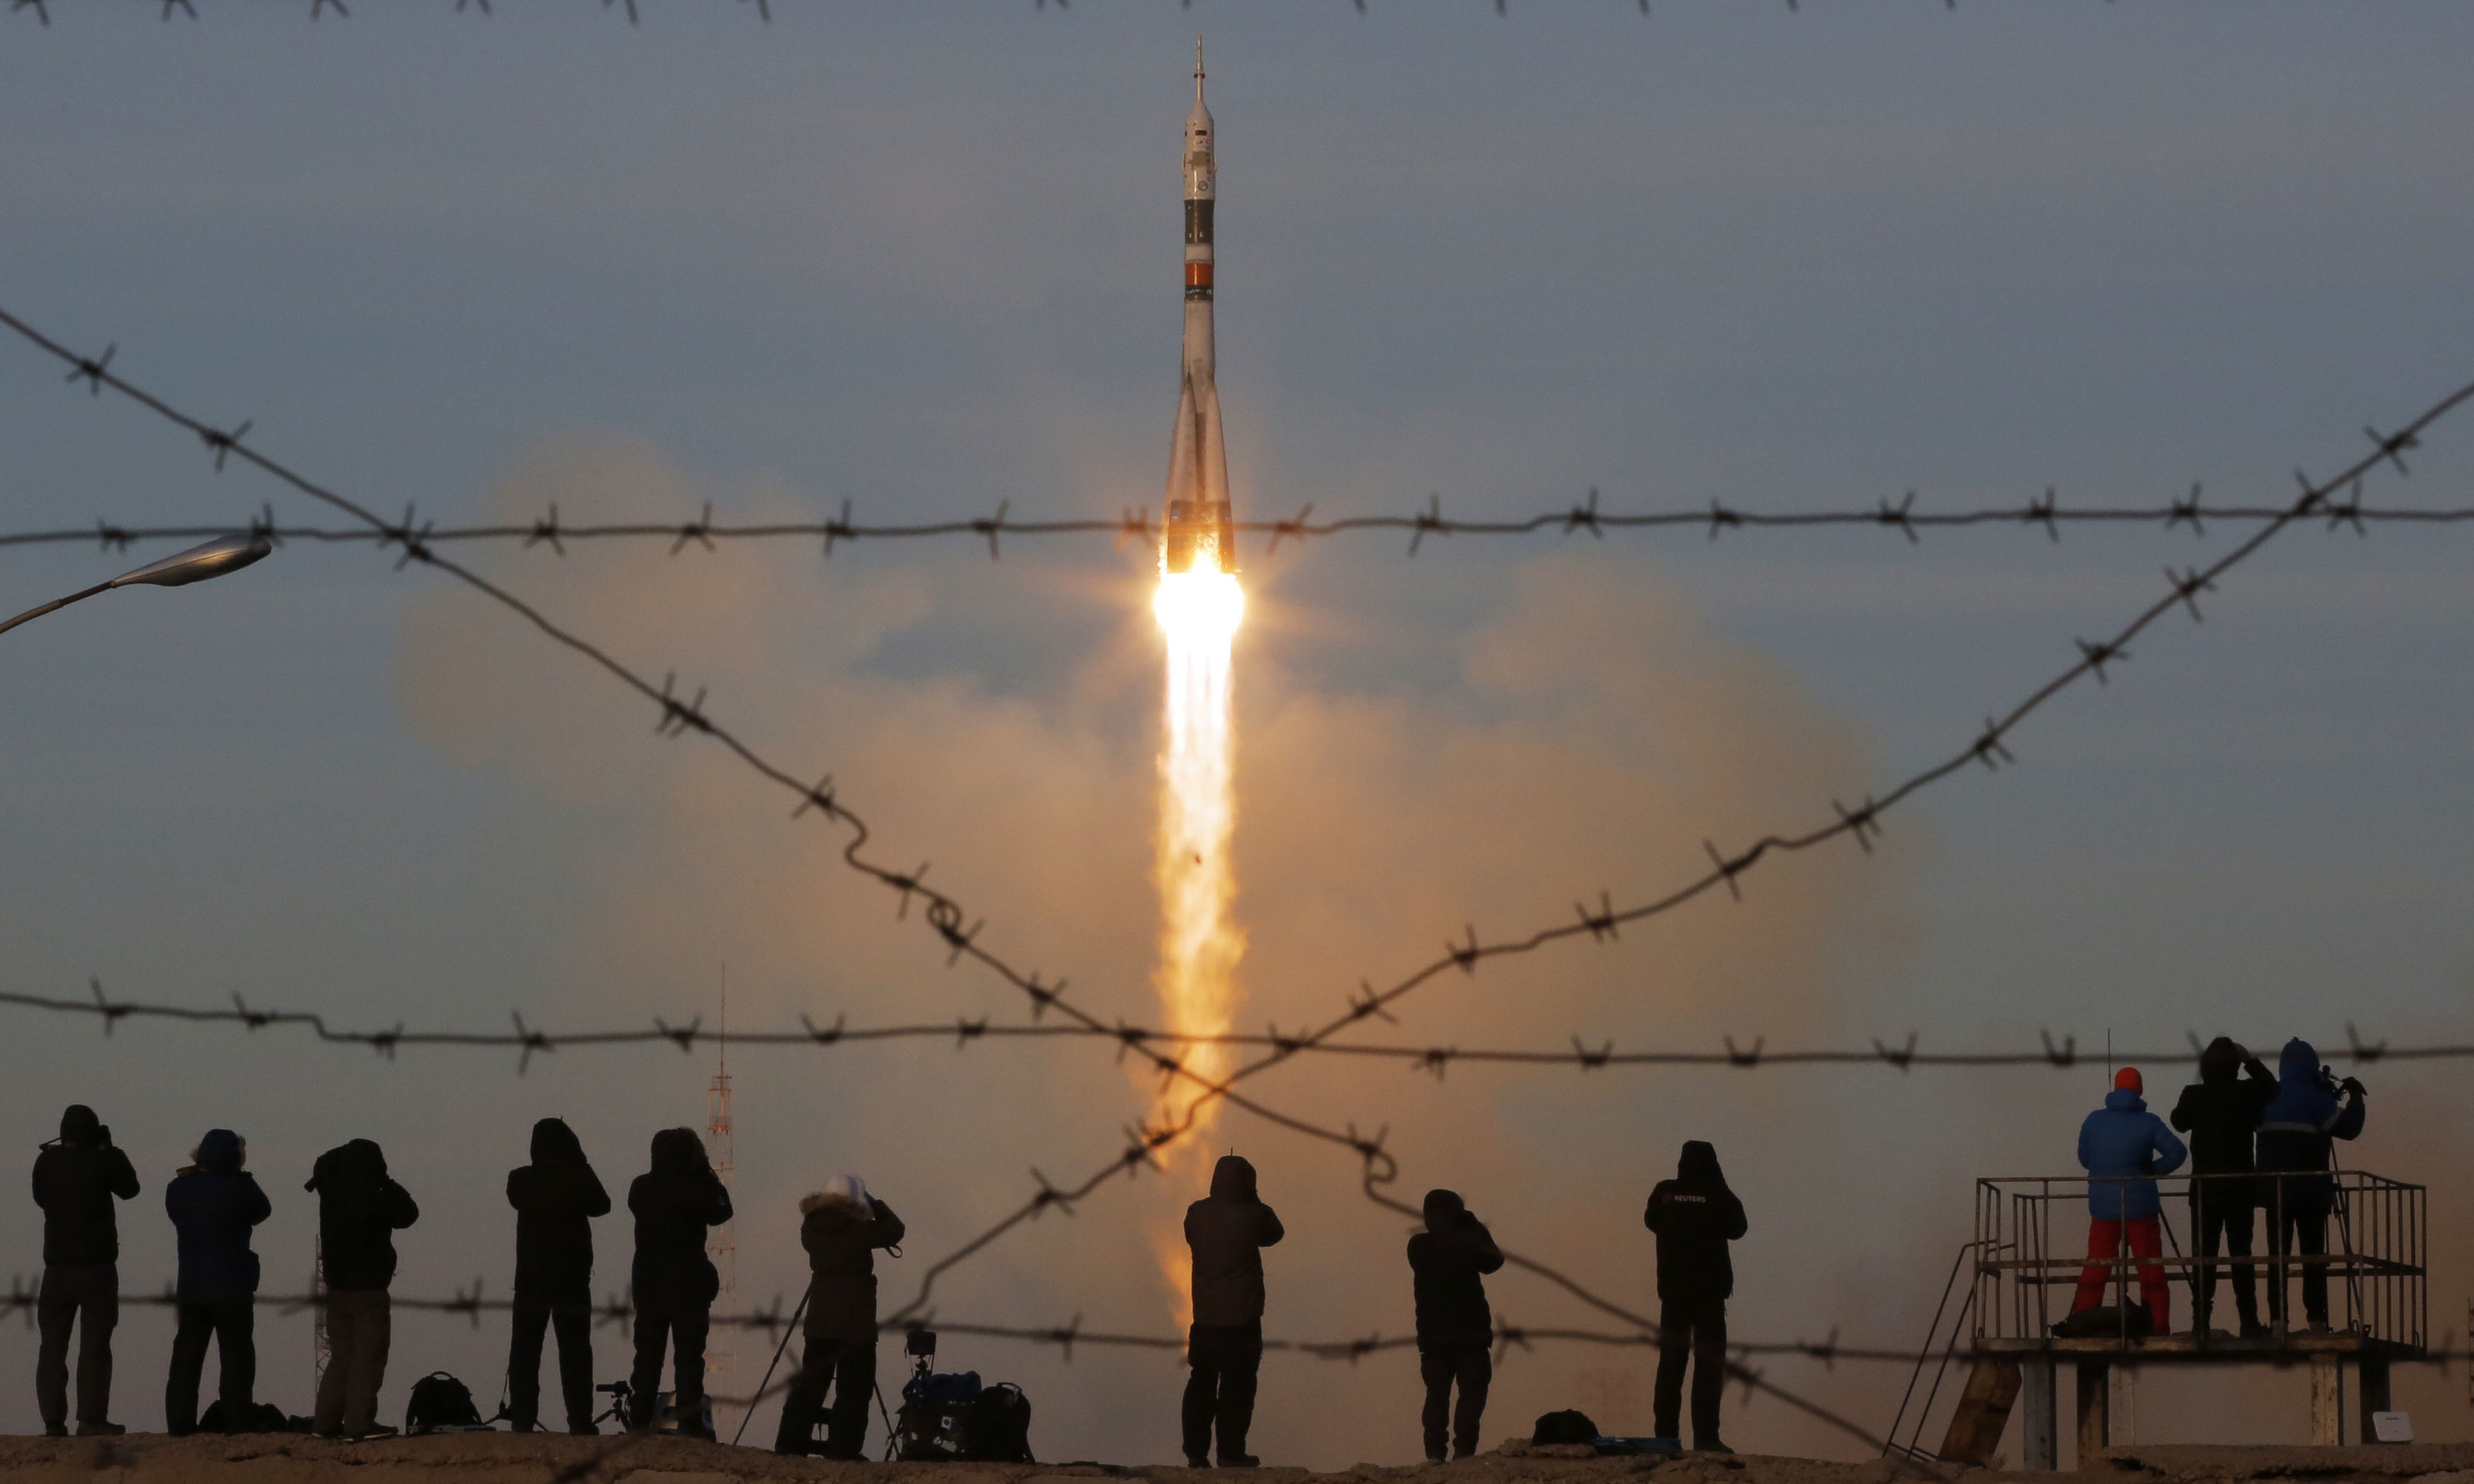 The Soyuz-FG rocket booster with Soyuz MS-11 space ship carrying a new crew to the International Space Station, ISS, blasts off at the Russian leased Baikonur cosmodrome, Kazakhstan.